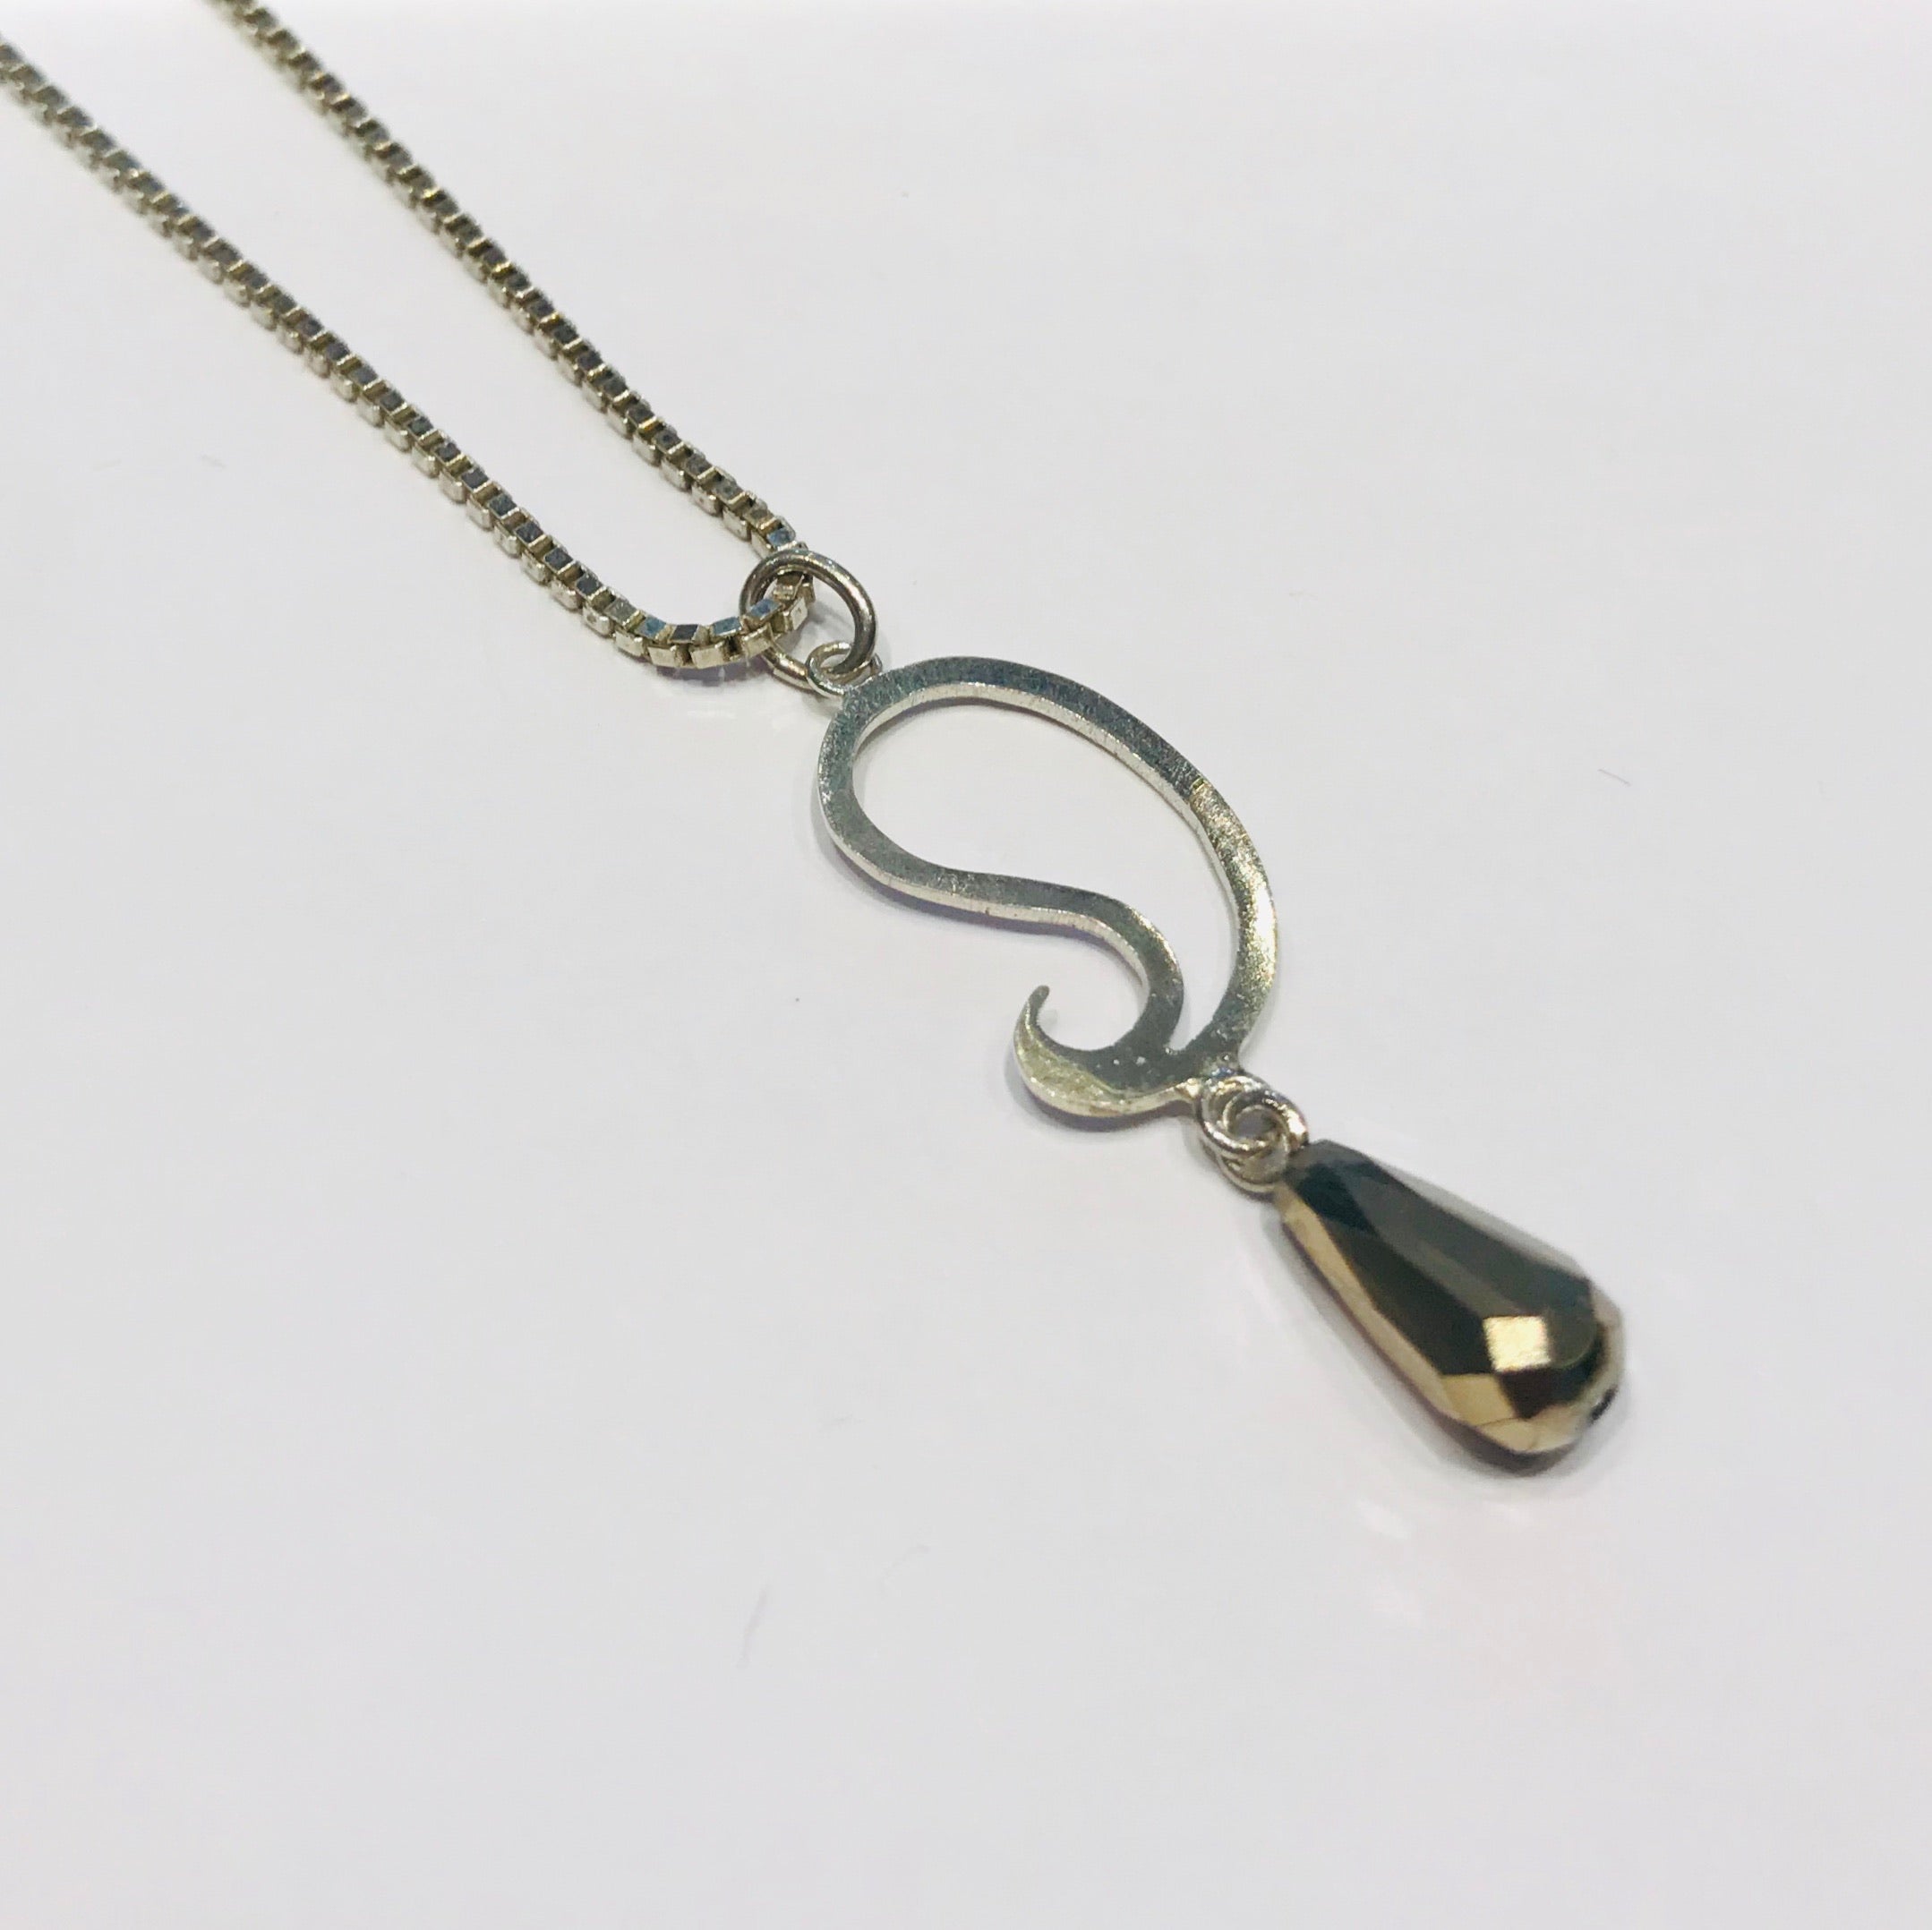 Atelier Elf silver necklace with pyrite stone